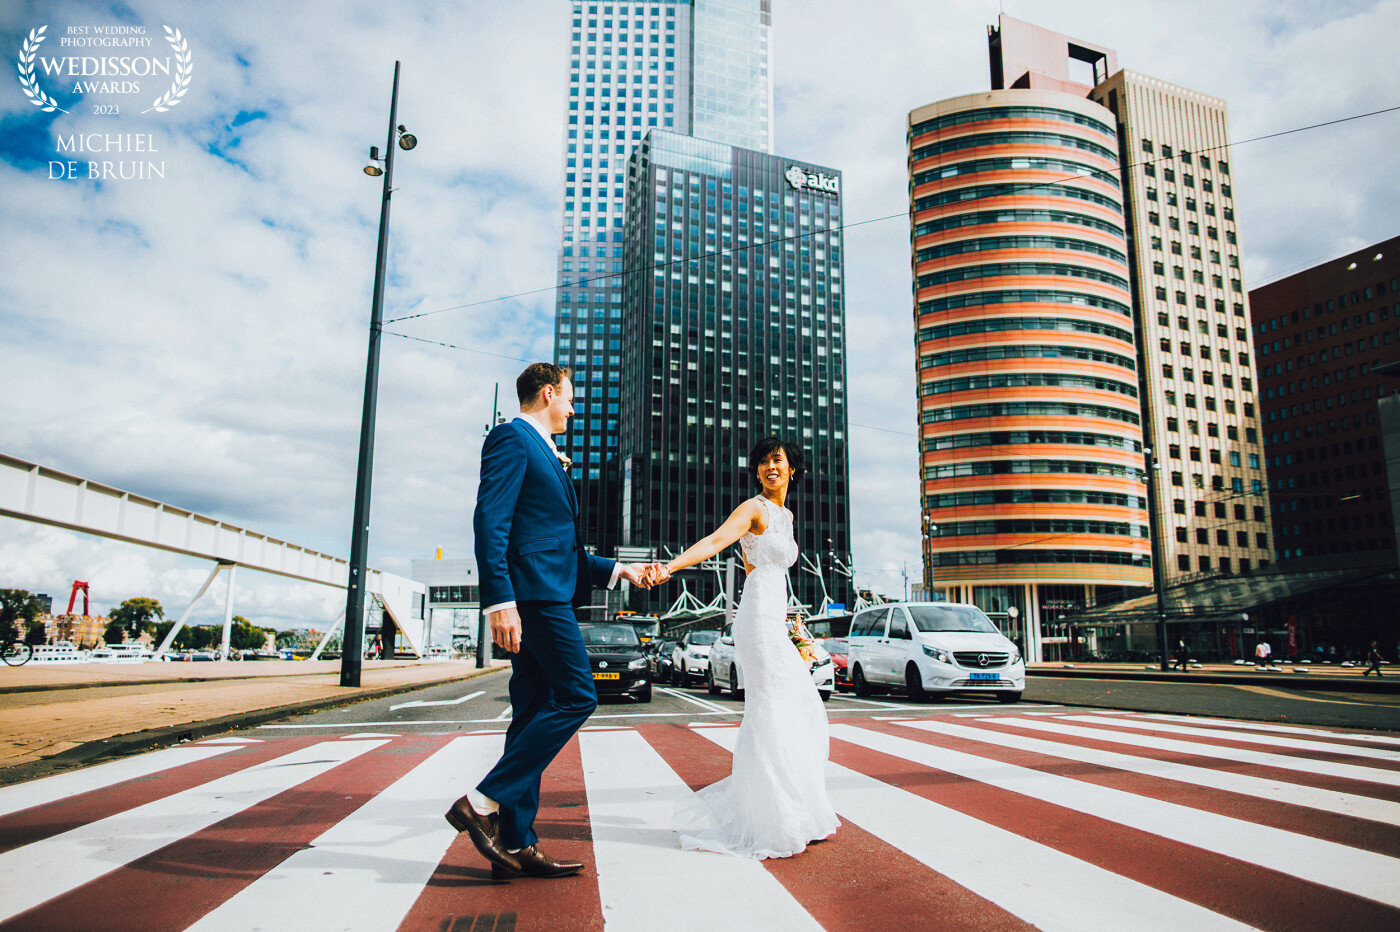 I love to make dynamic photos just walking next to the bride and groom down the streets and catch the spontaneous moments.